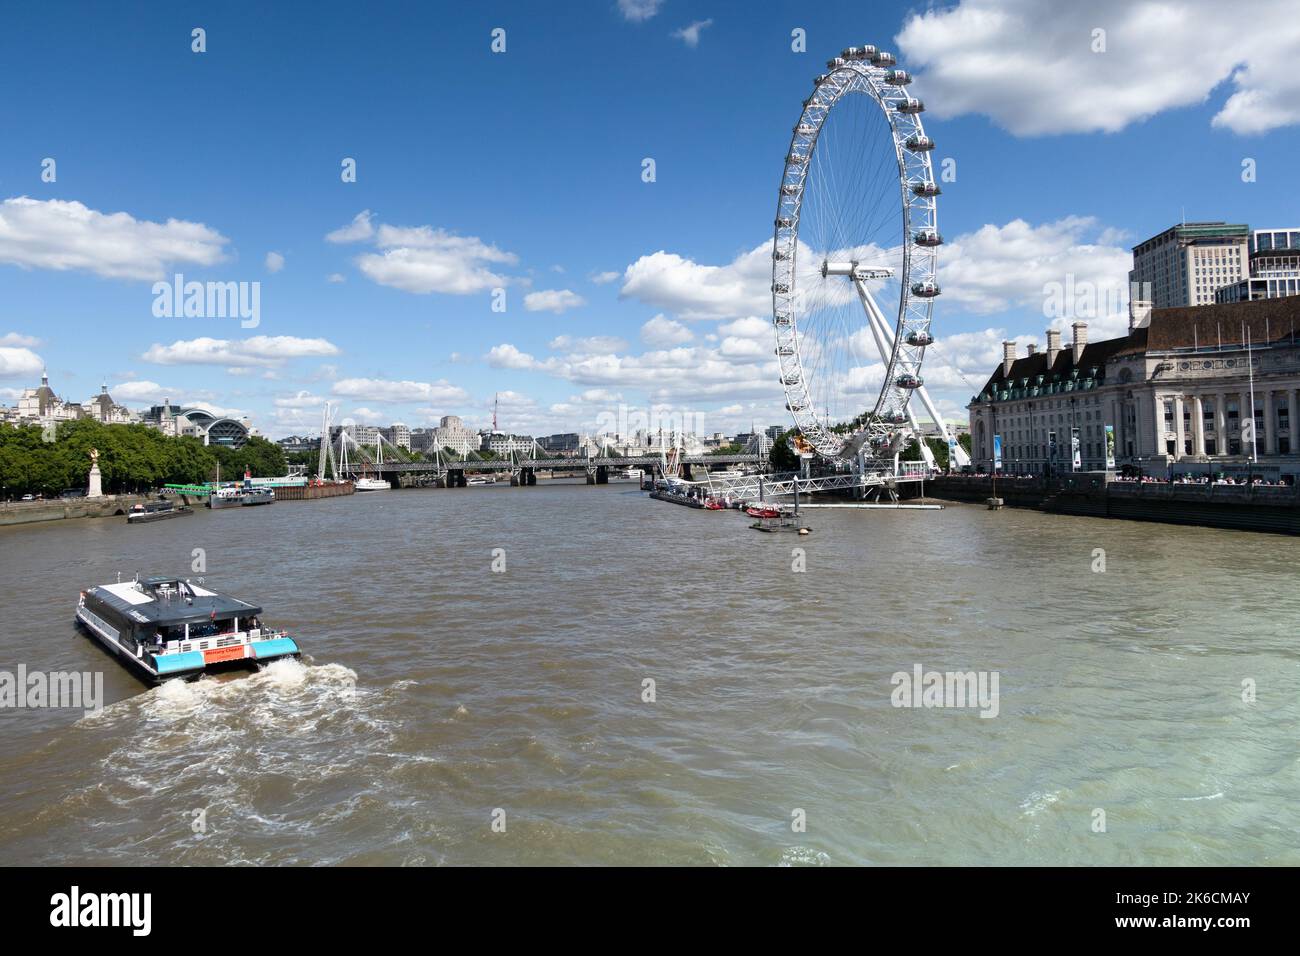 View of the river thames showing river cruise boat and the London eye Stock Photo